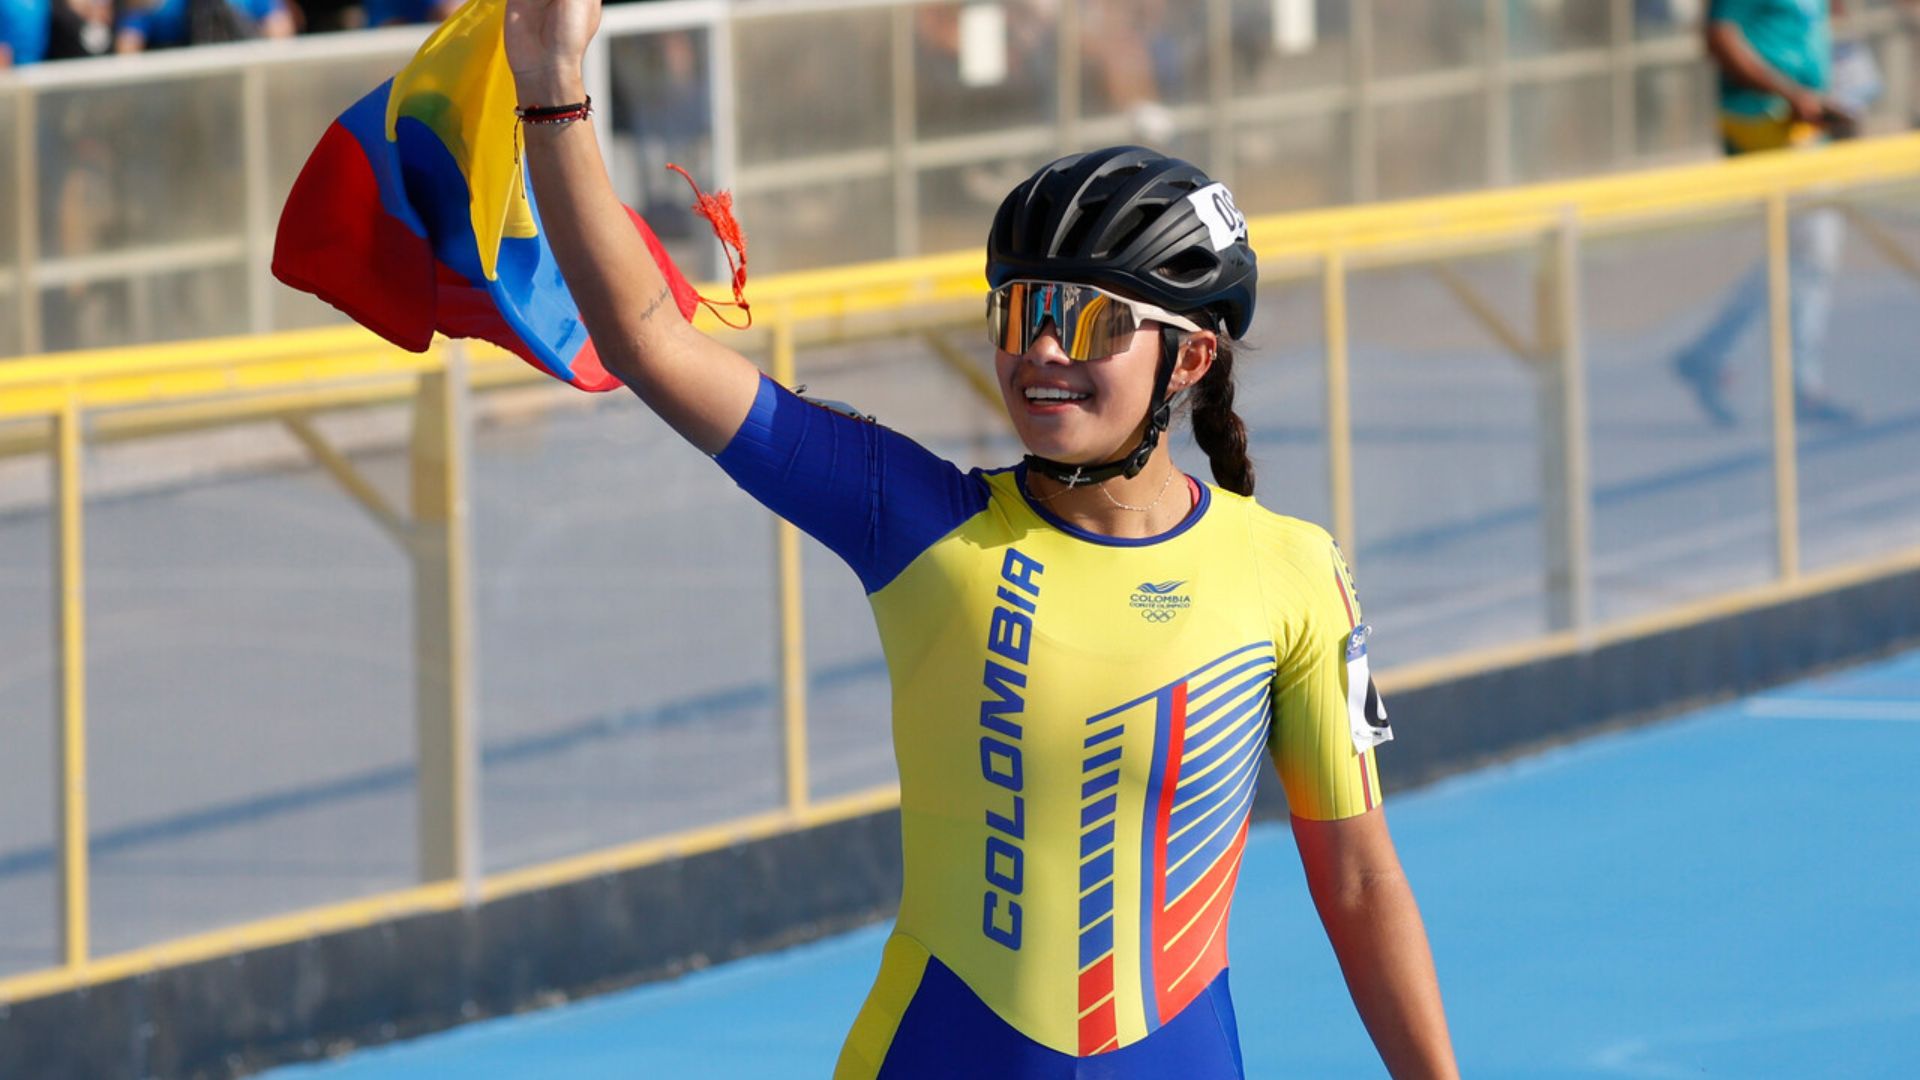 Colombia secures gold in the 1000-meter female's sprint